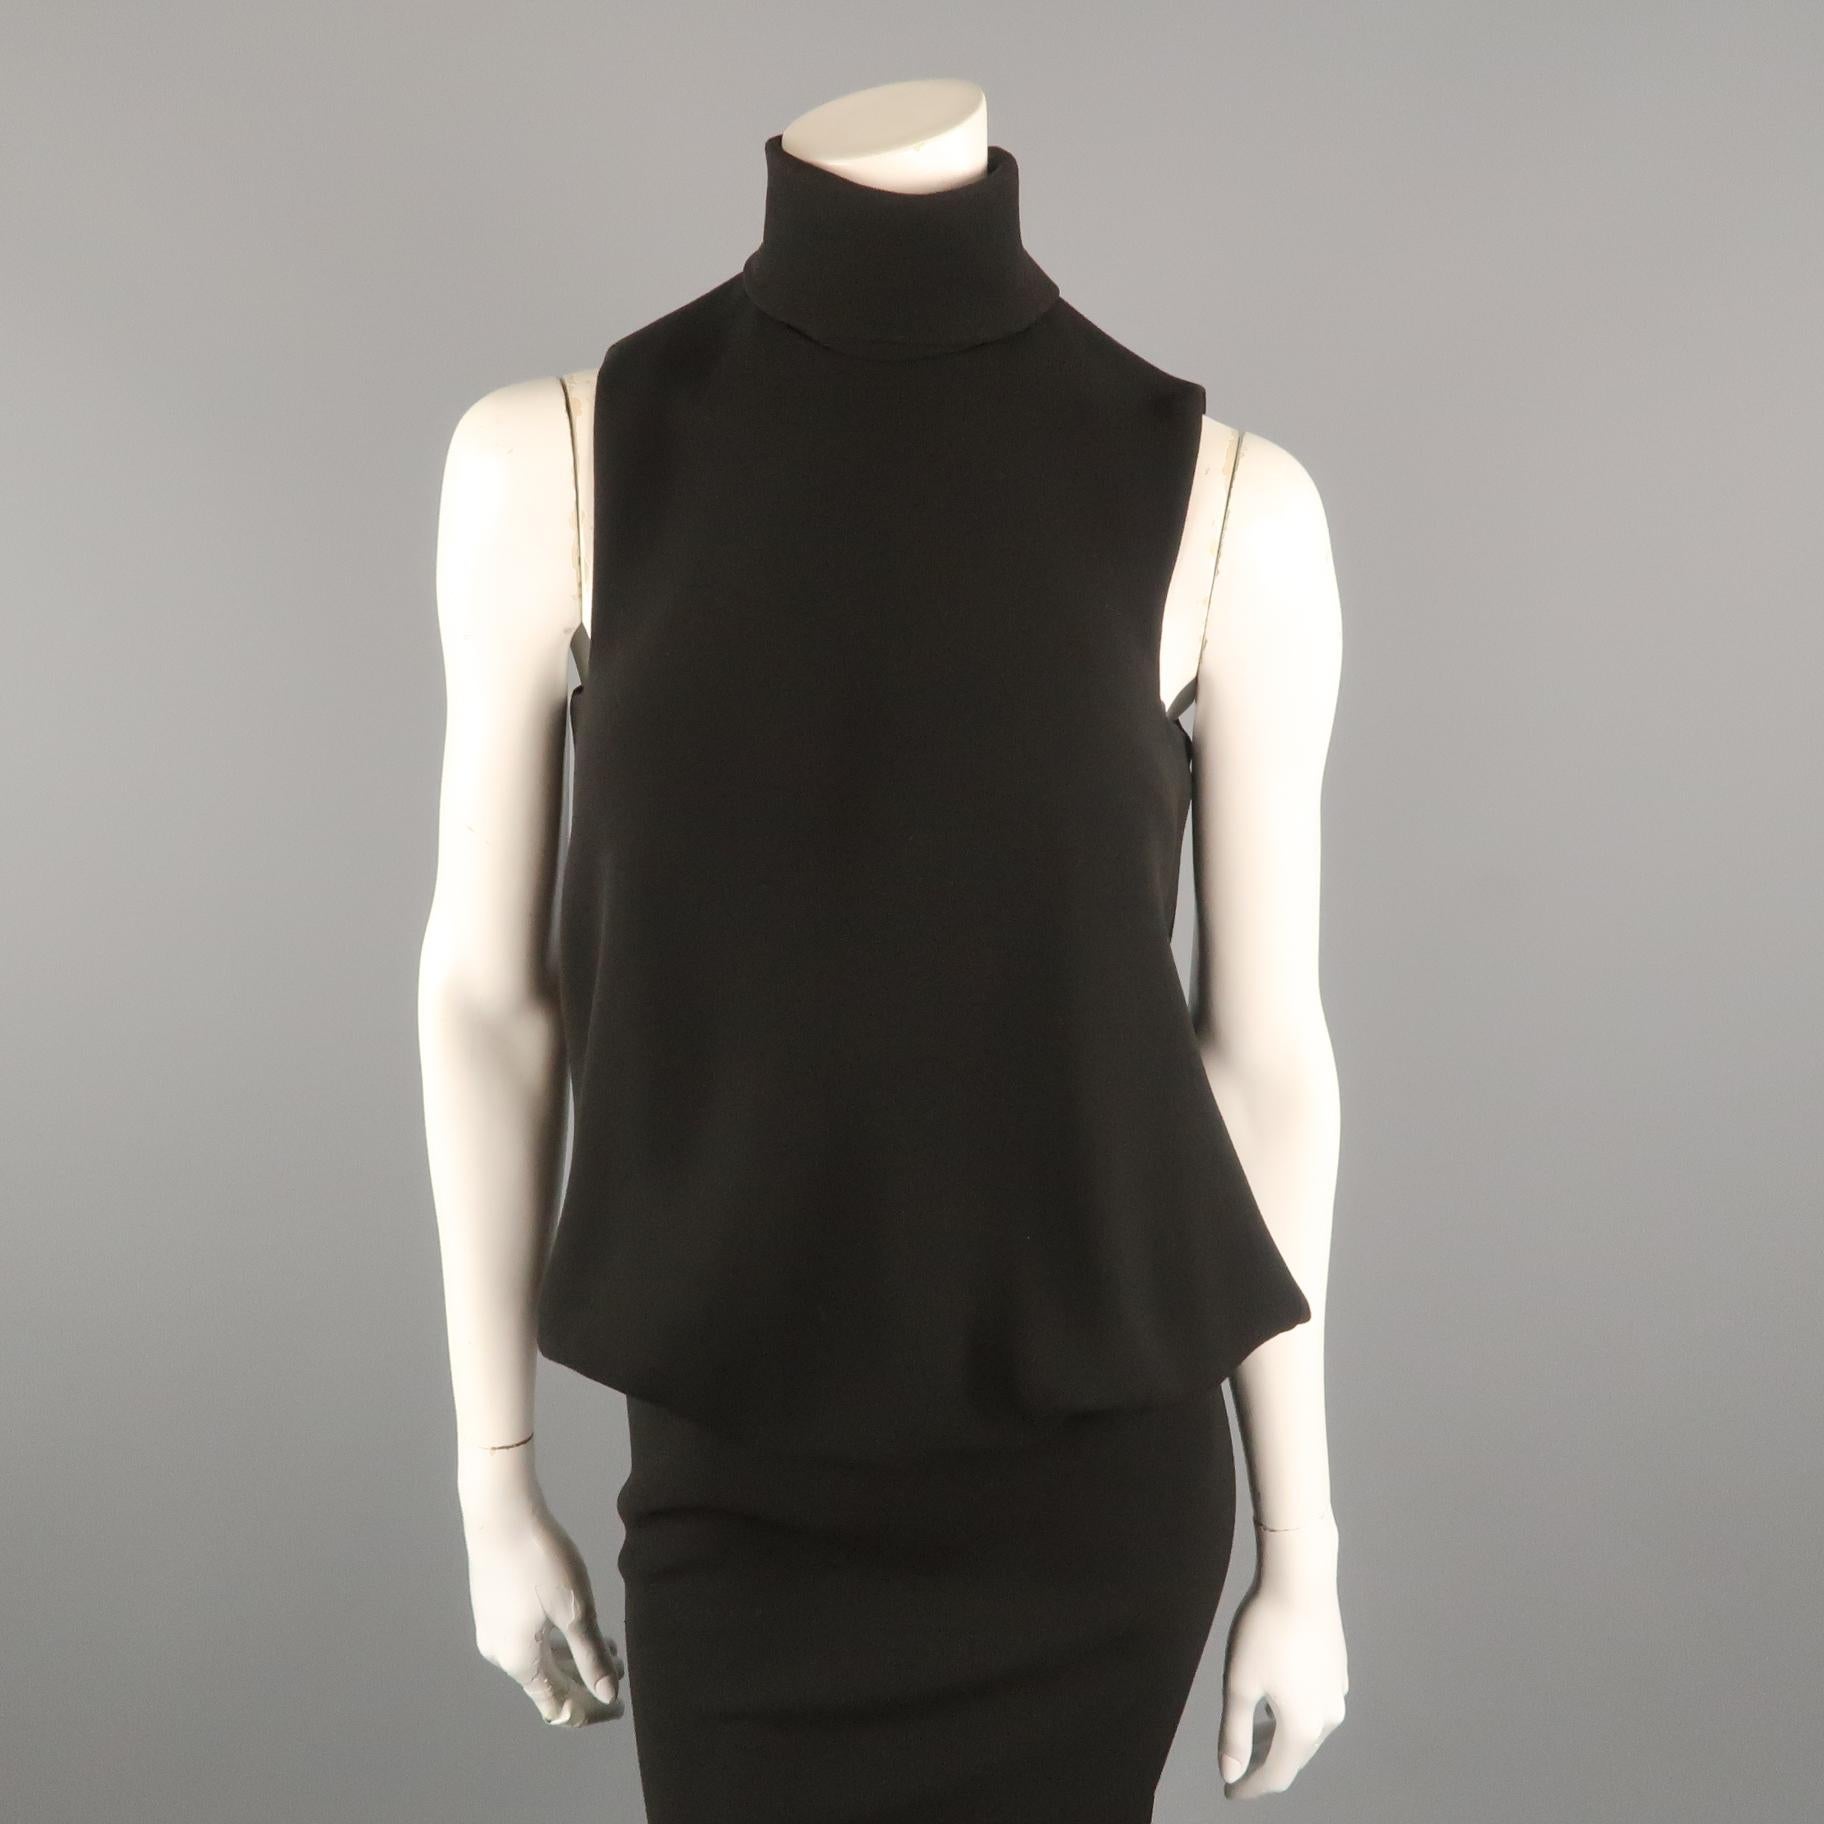 This fabulous archive JEAN PAUL GAULTIER evening dress comes in black crepe with a fold over high turtleneck, sleeveless top with bubble hem flounce over waistline, open slit back, and long pencil skirt with flaired hem. Made in Italy.
 
Excellent